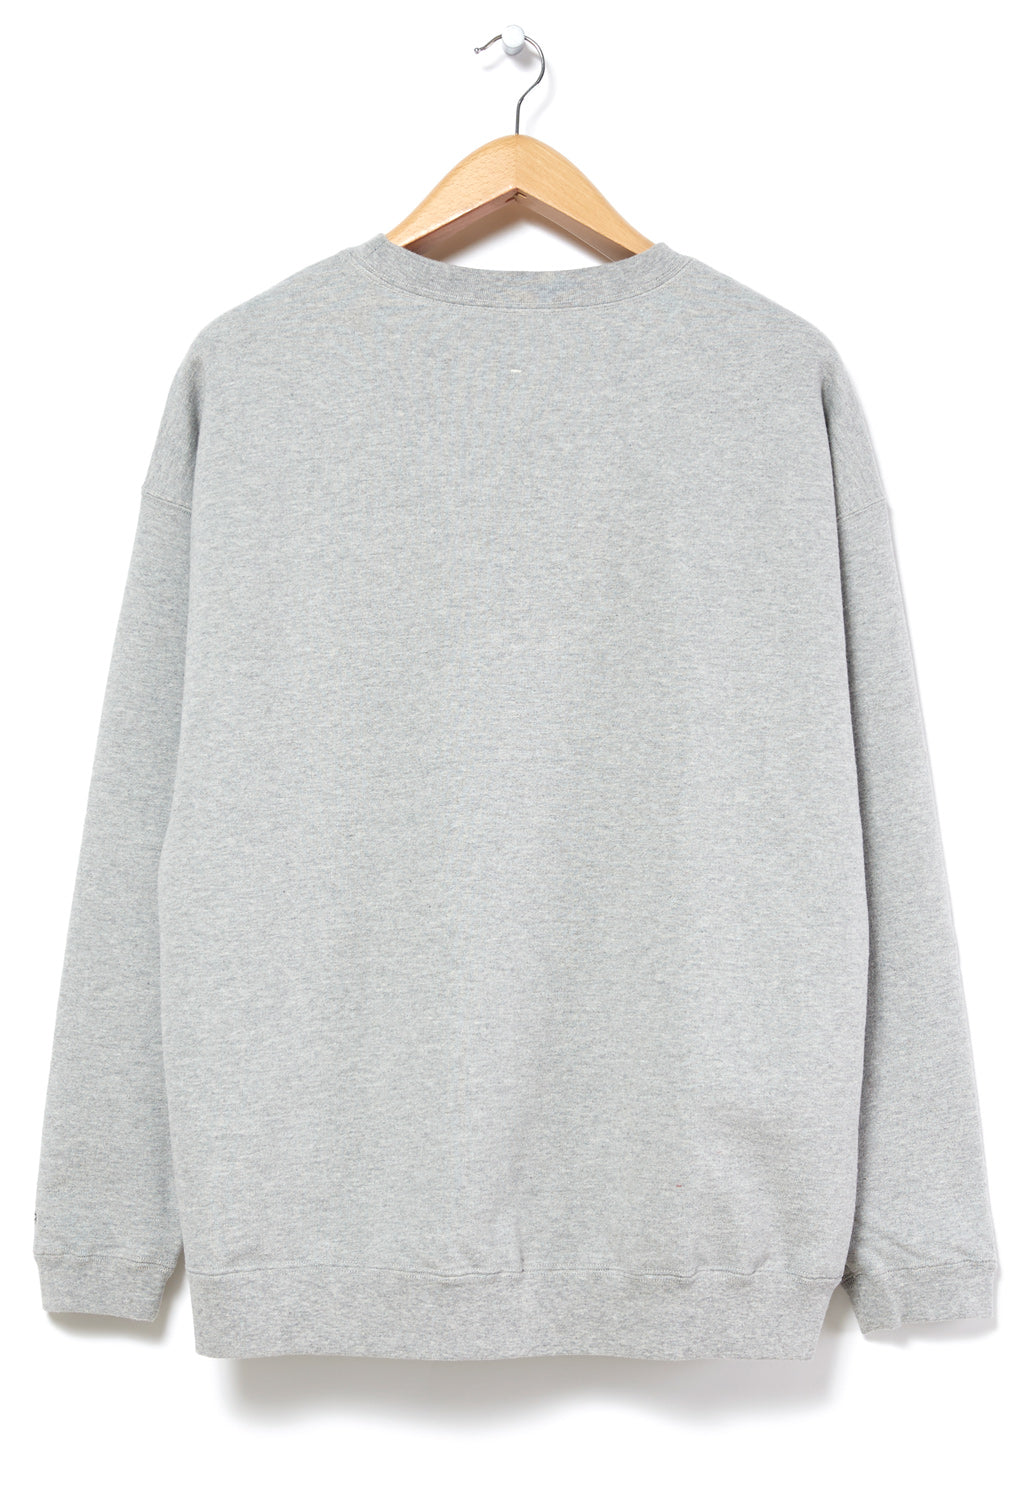 Snow Peak Recycled Cotton Sweat Crewneck - Mid Grey – Outsiders